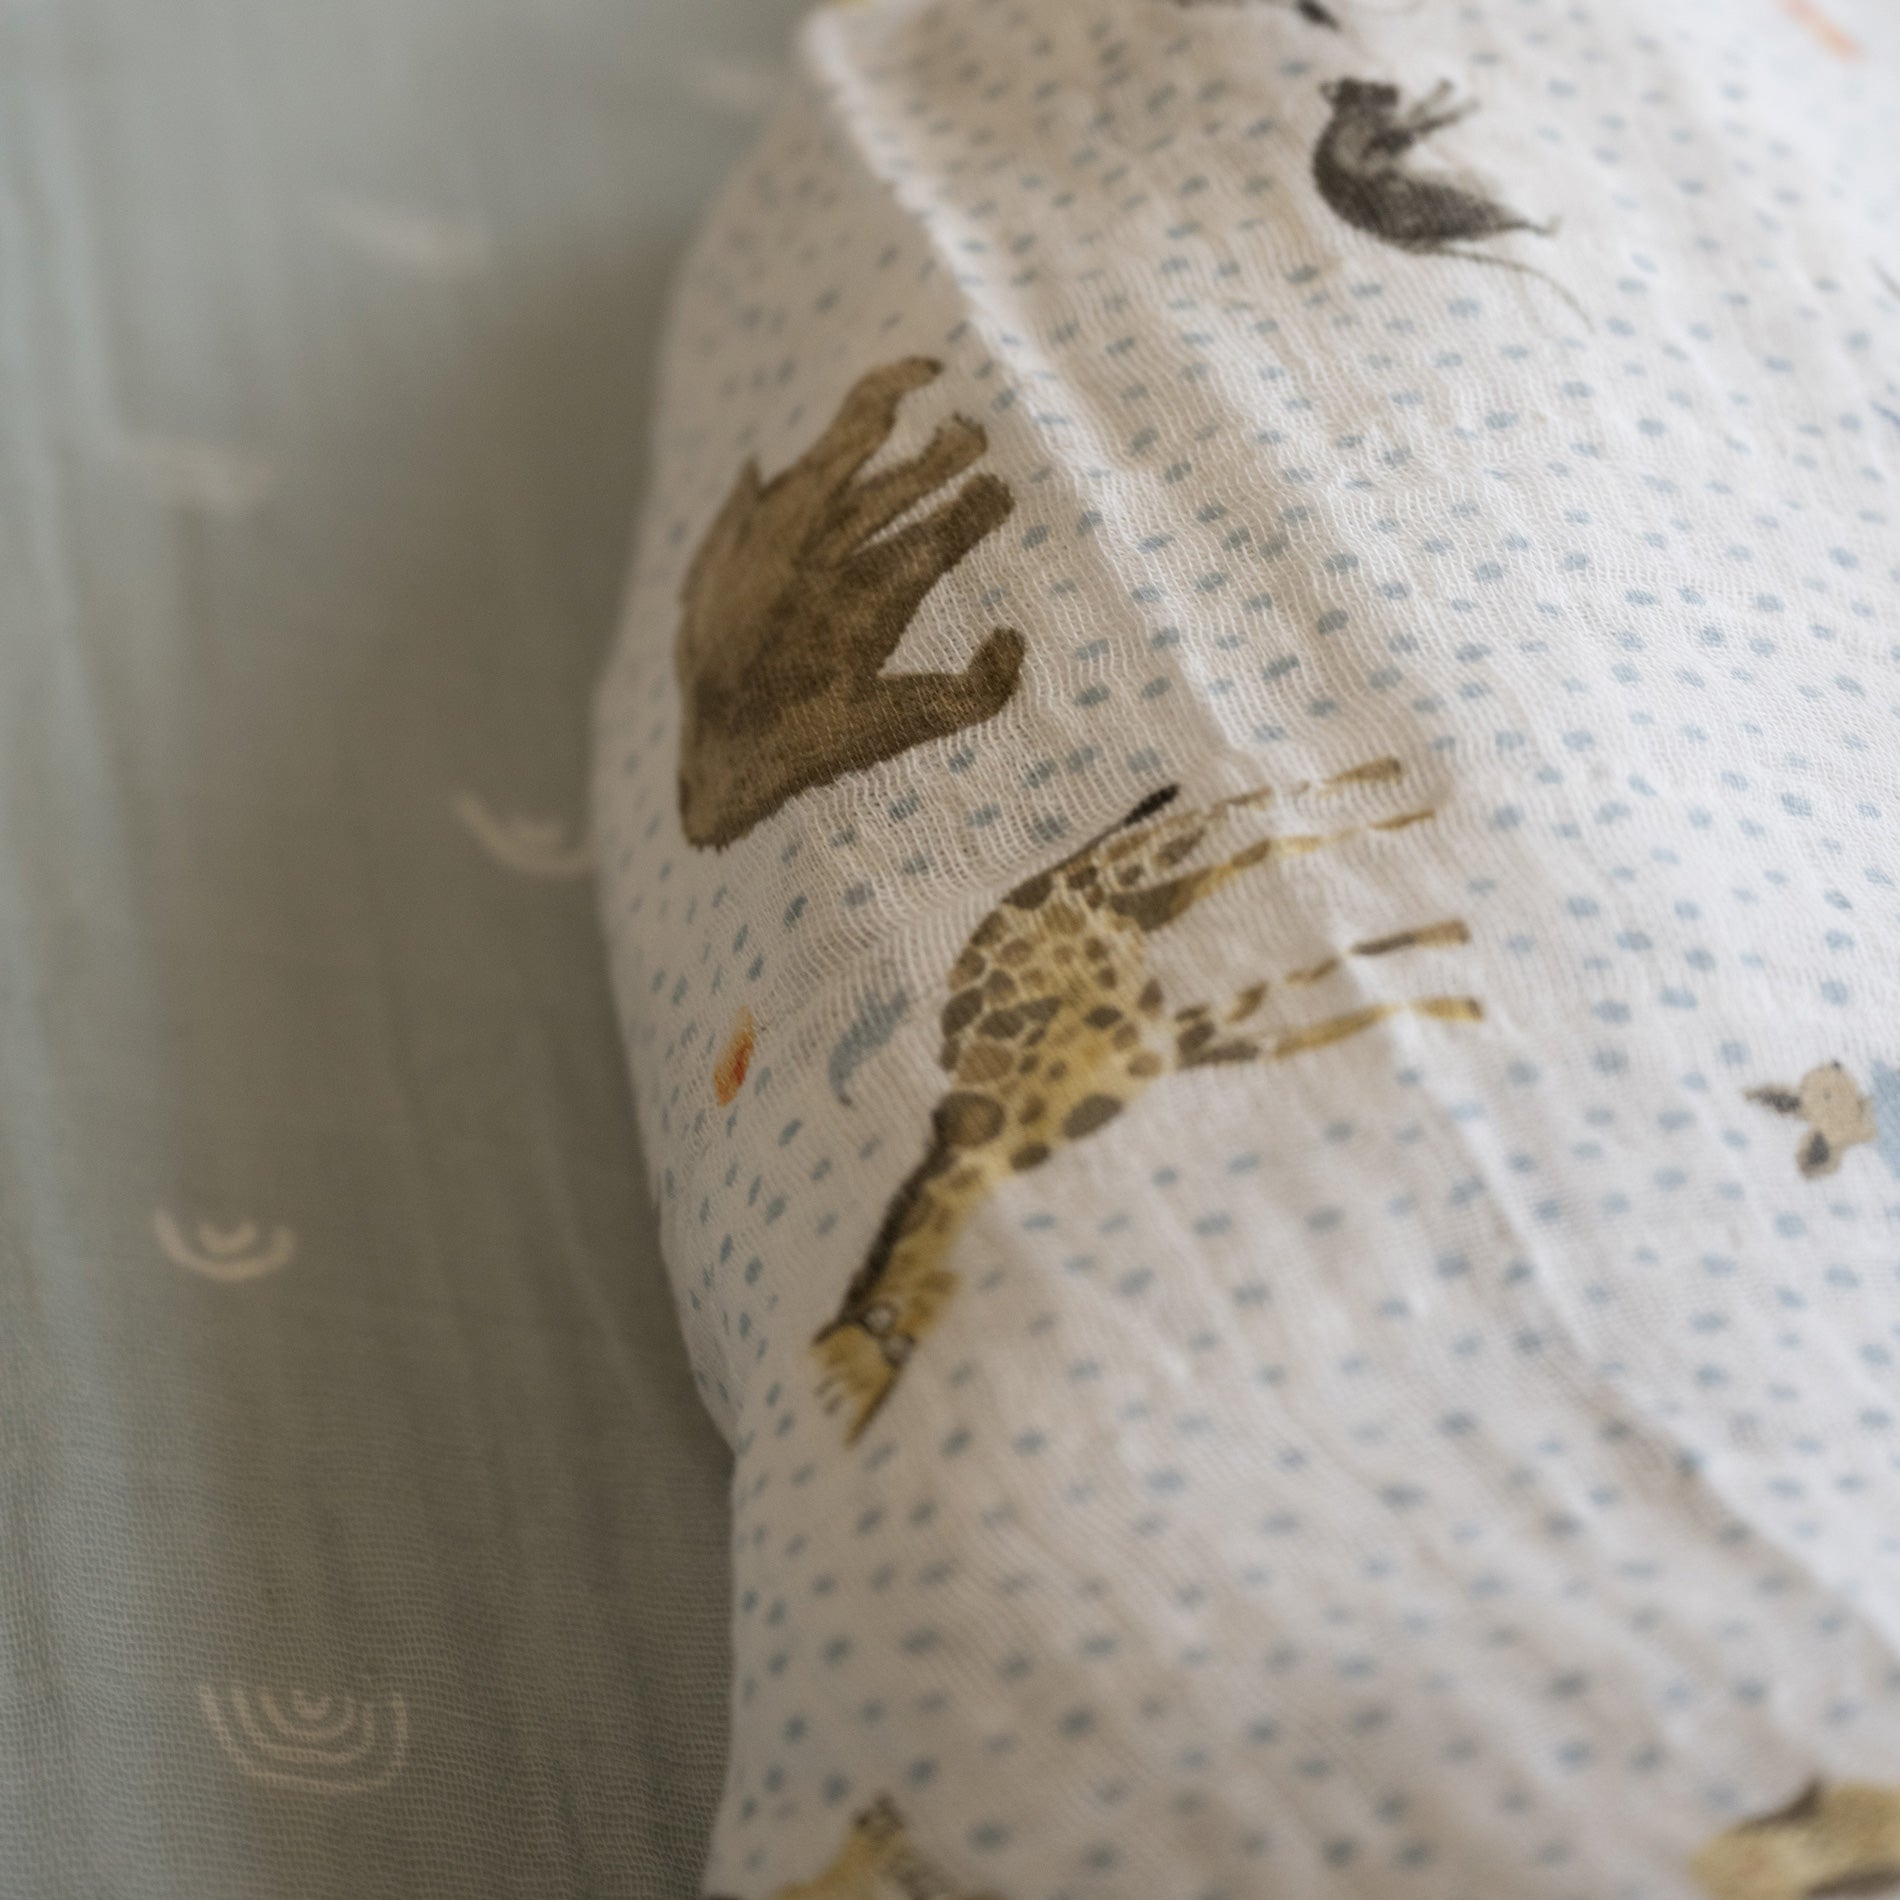 Cotton Muslin Swaddle Blanket - Party Animals